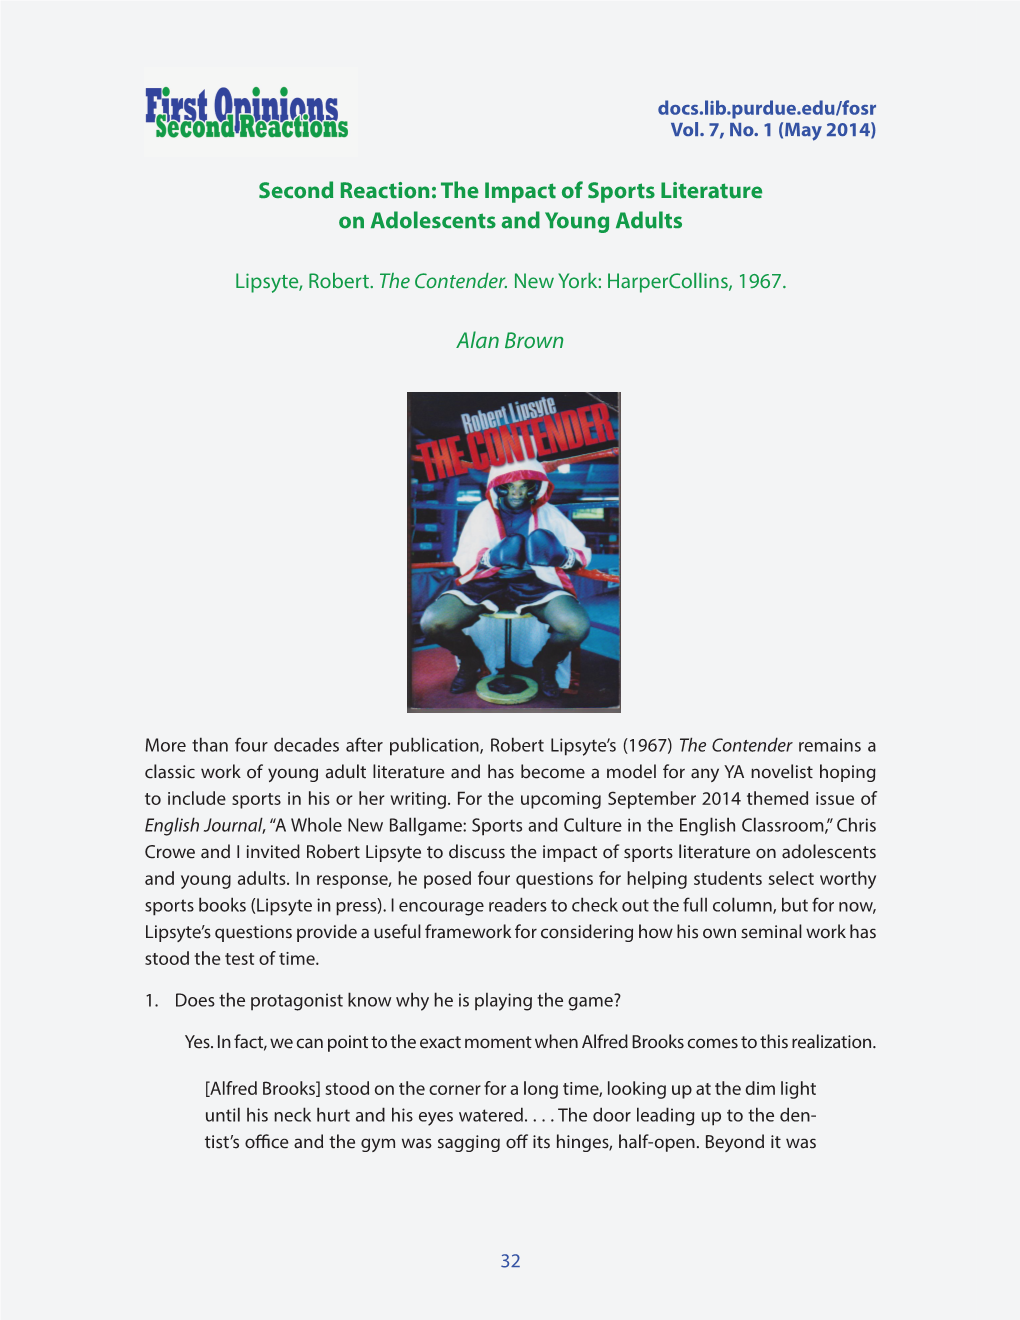 The Impact of Sports Literature on Adolescents and Young Adults